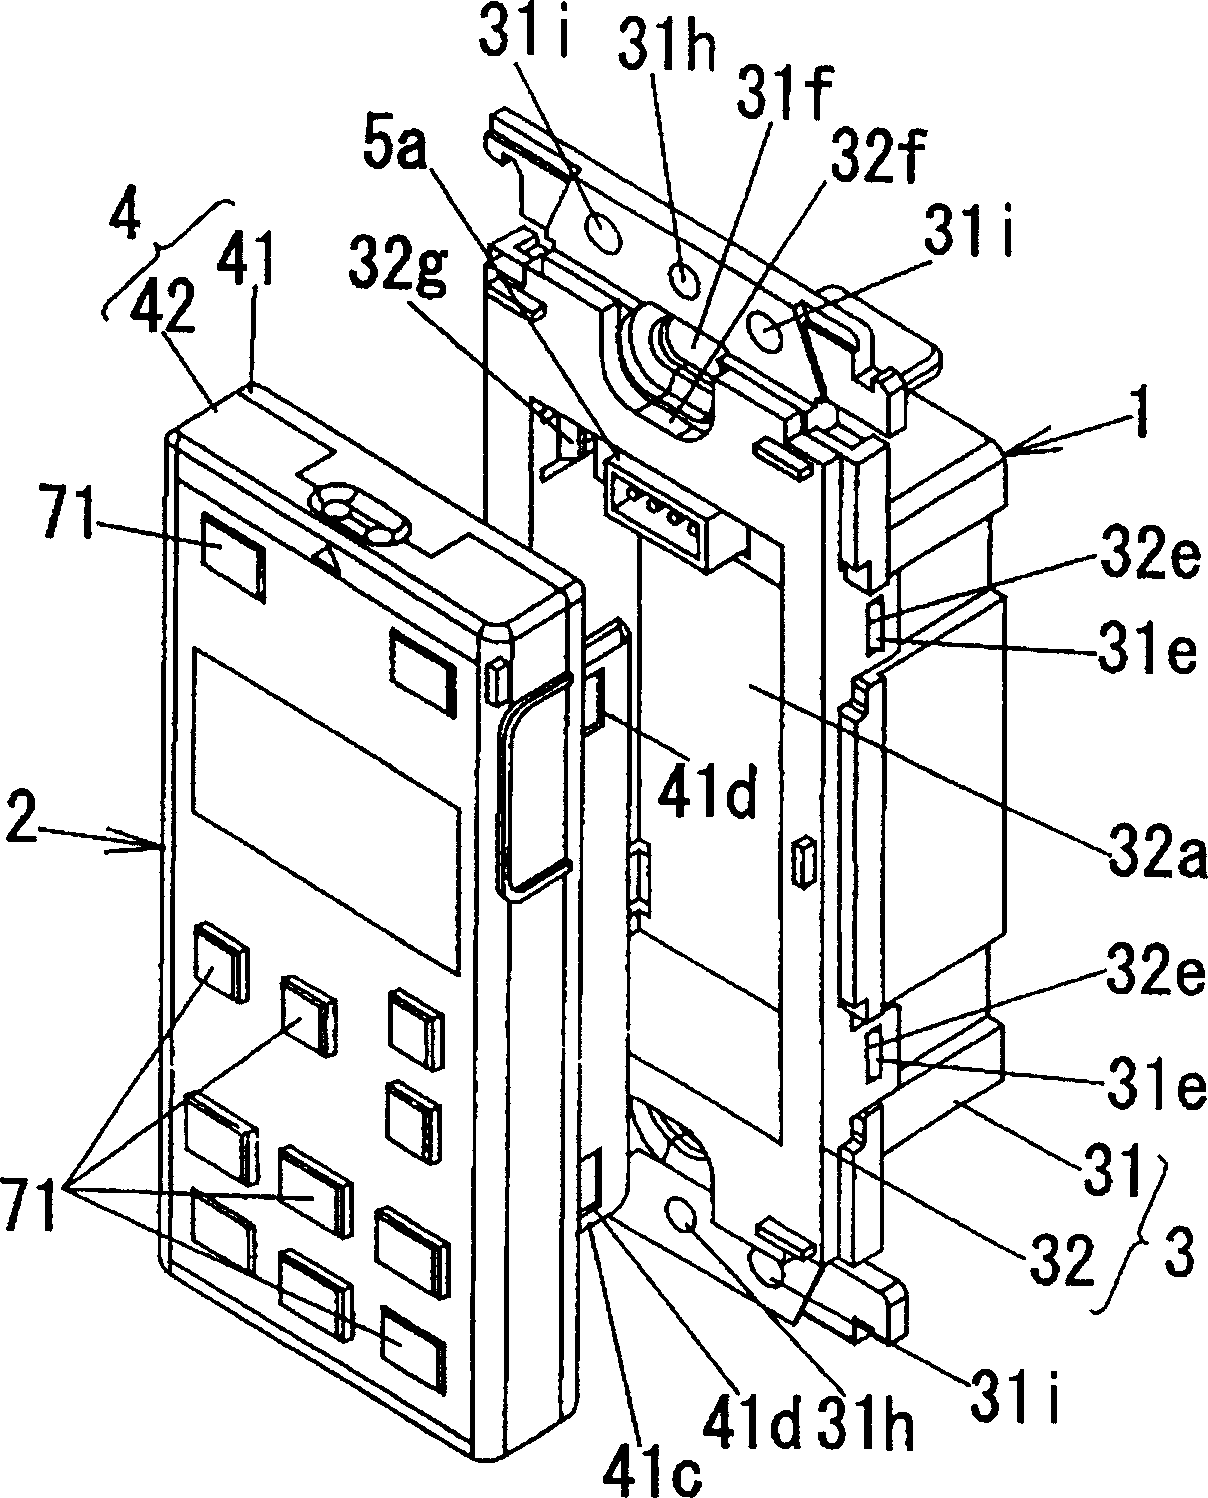 Setting apparatus for remote monitoring and control system